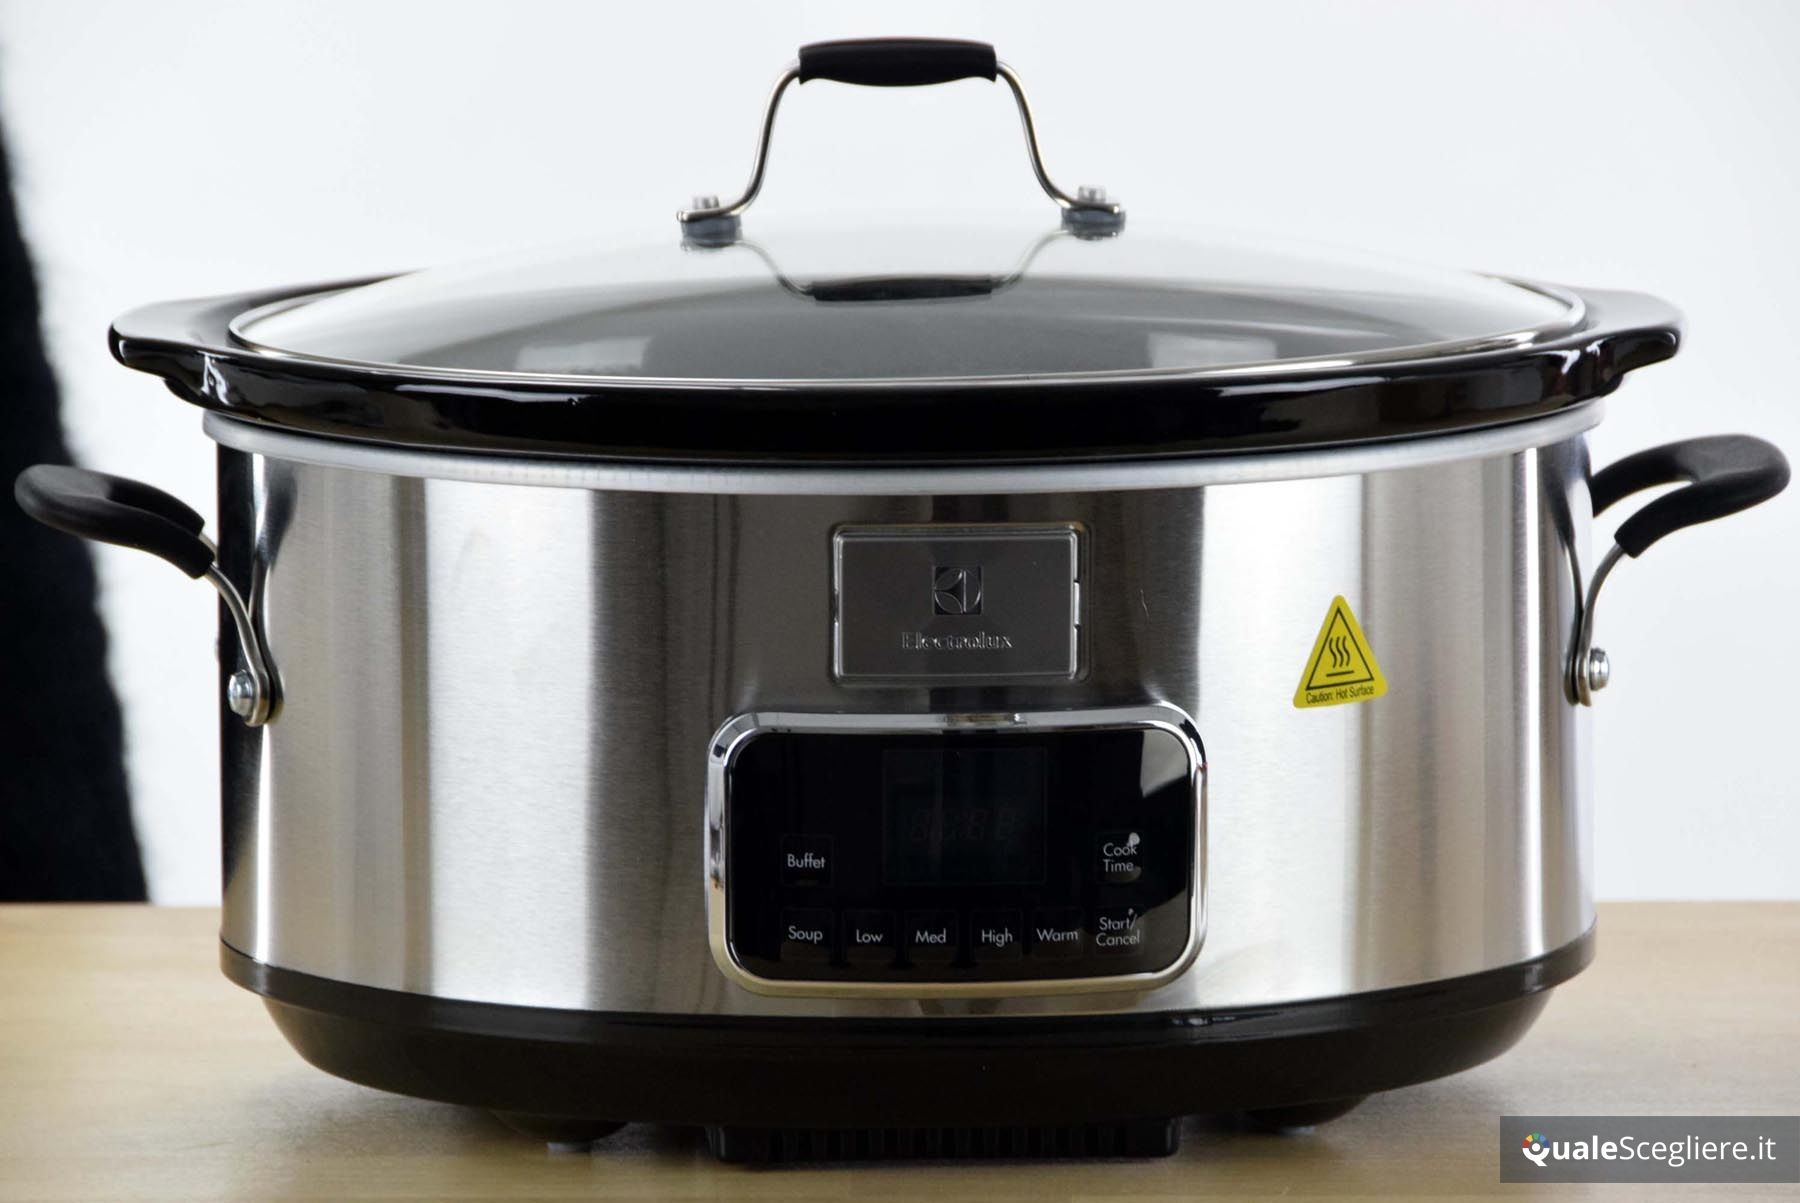 Electrolux slow cooker